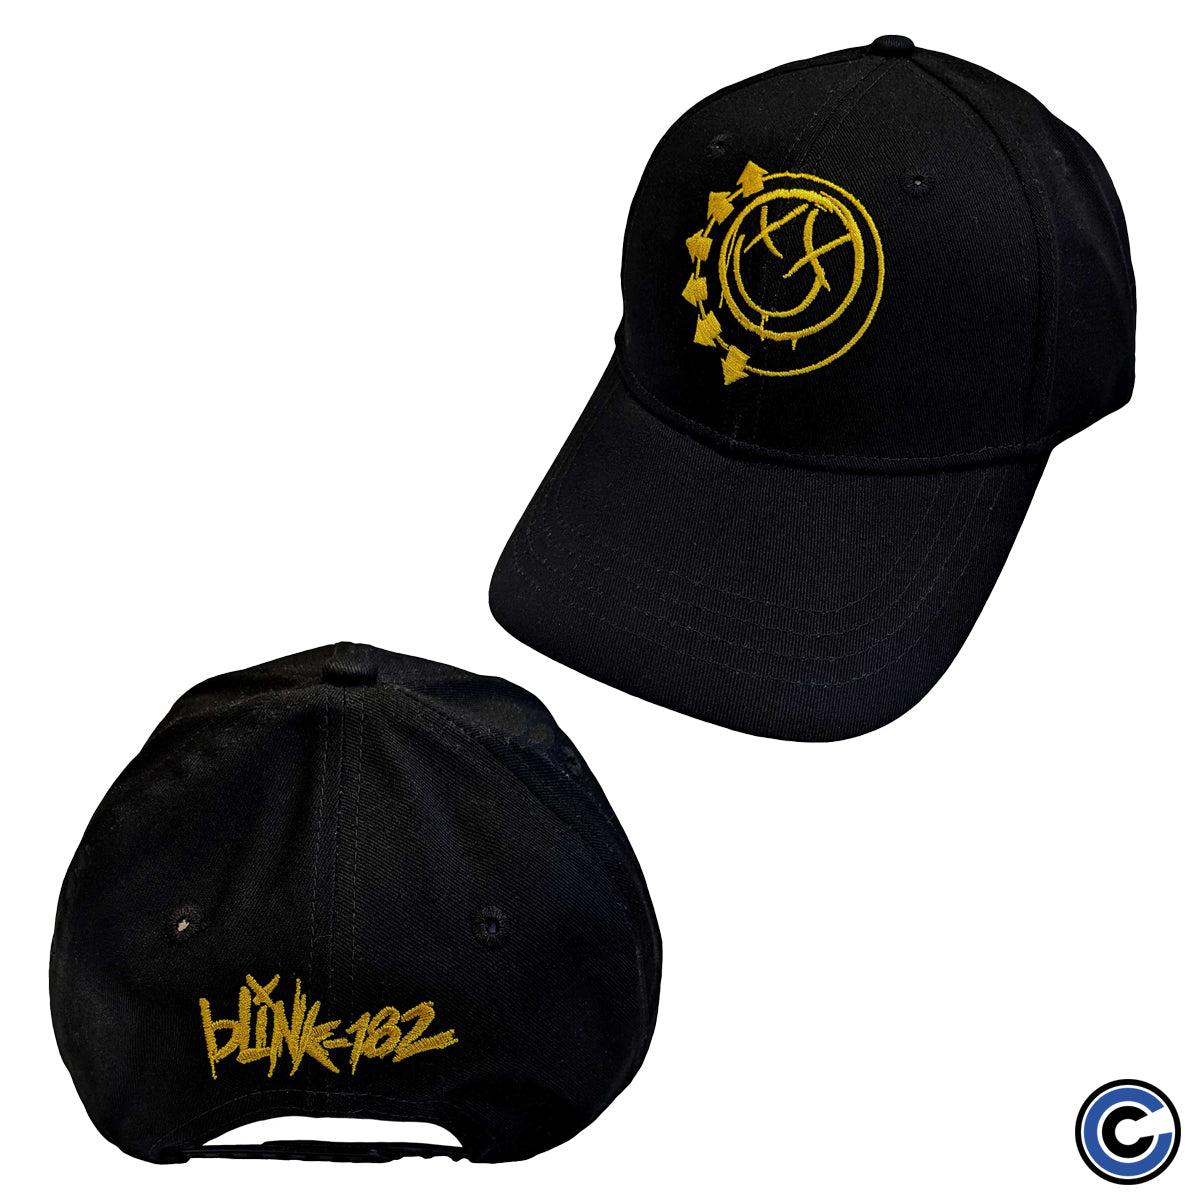 Blink-182 "Yellow Smiley" Hat